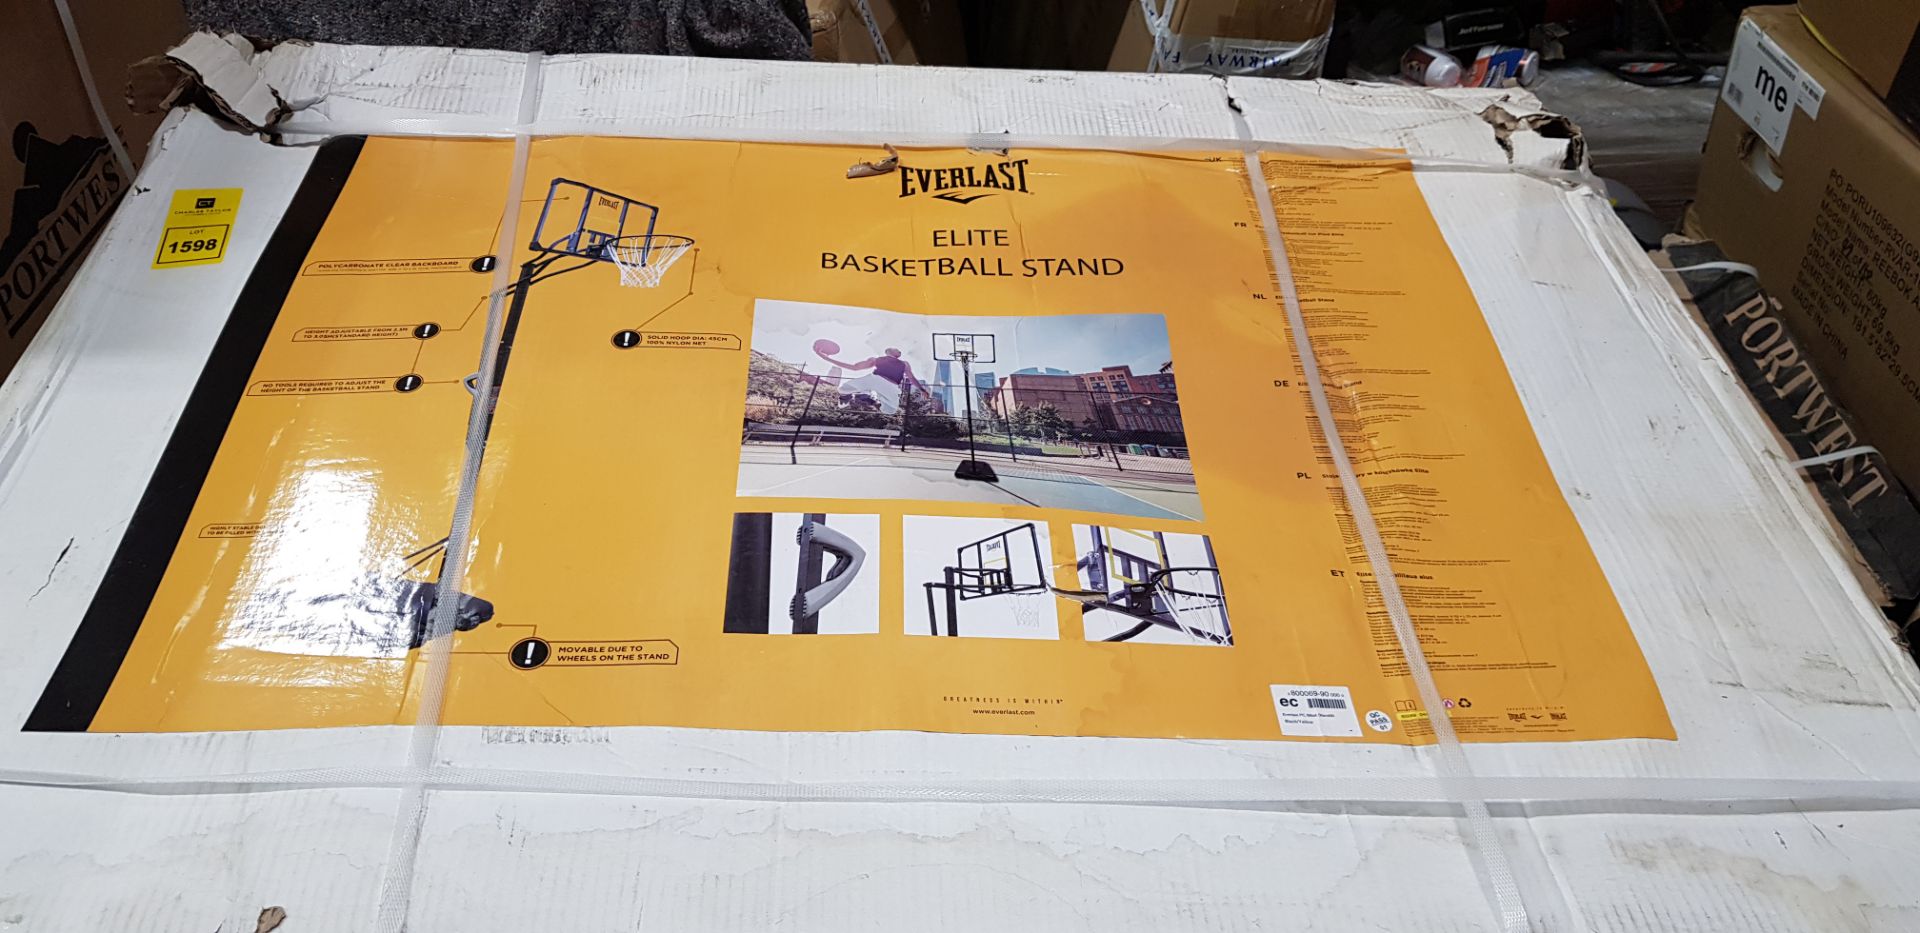 1 X BRAND NEW EVERLAST ELITE BASKETBALL STAND IN BLACK AND YELLOW (NOTE BOX IS SLIGHTLY DAMAGED)